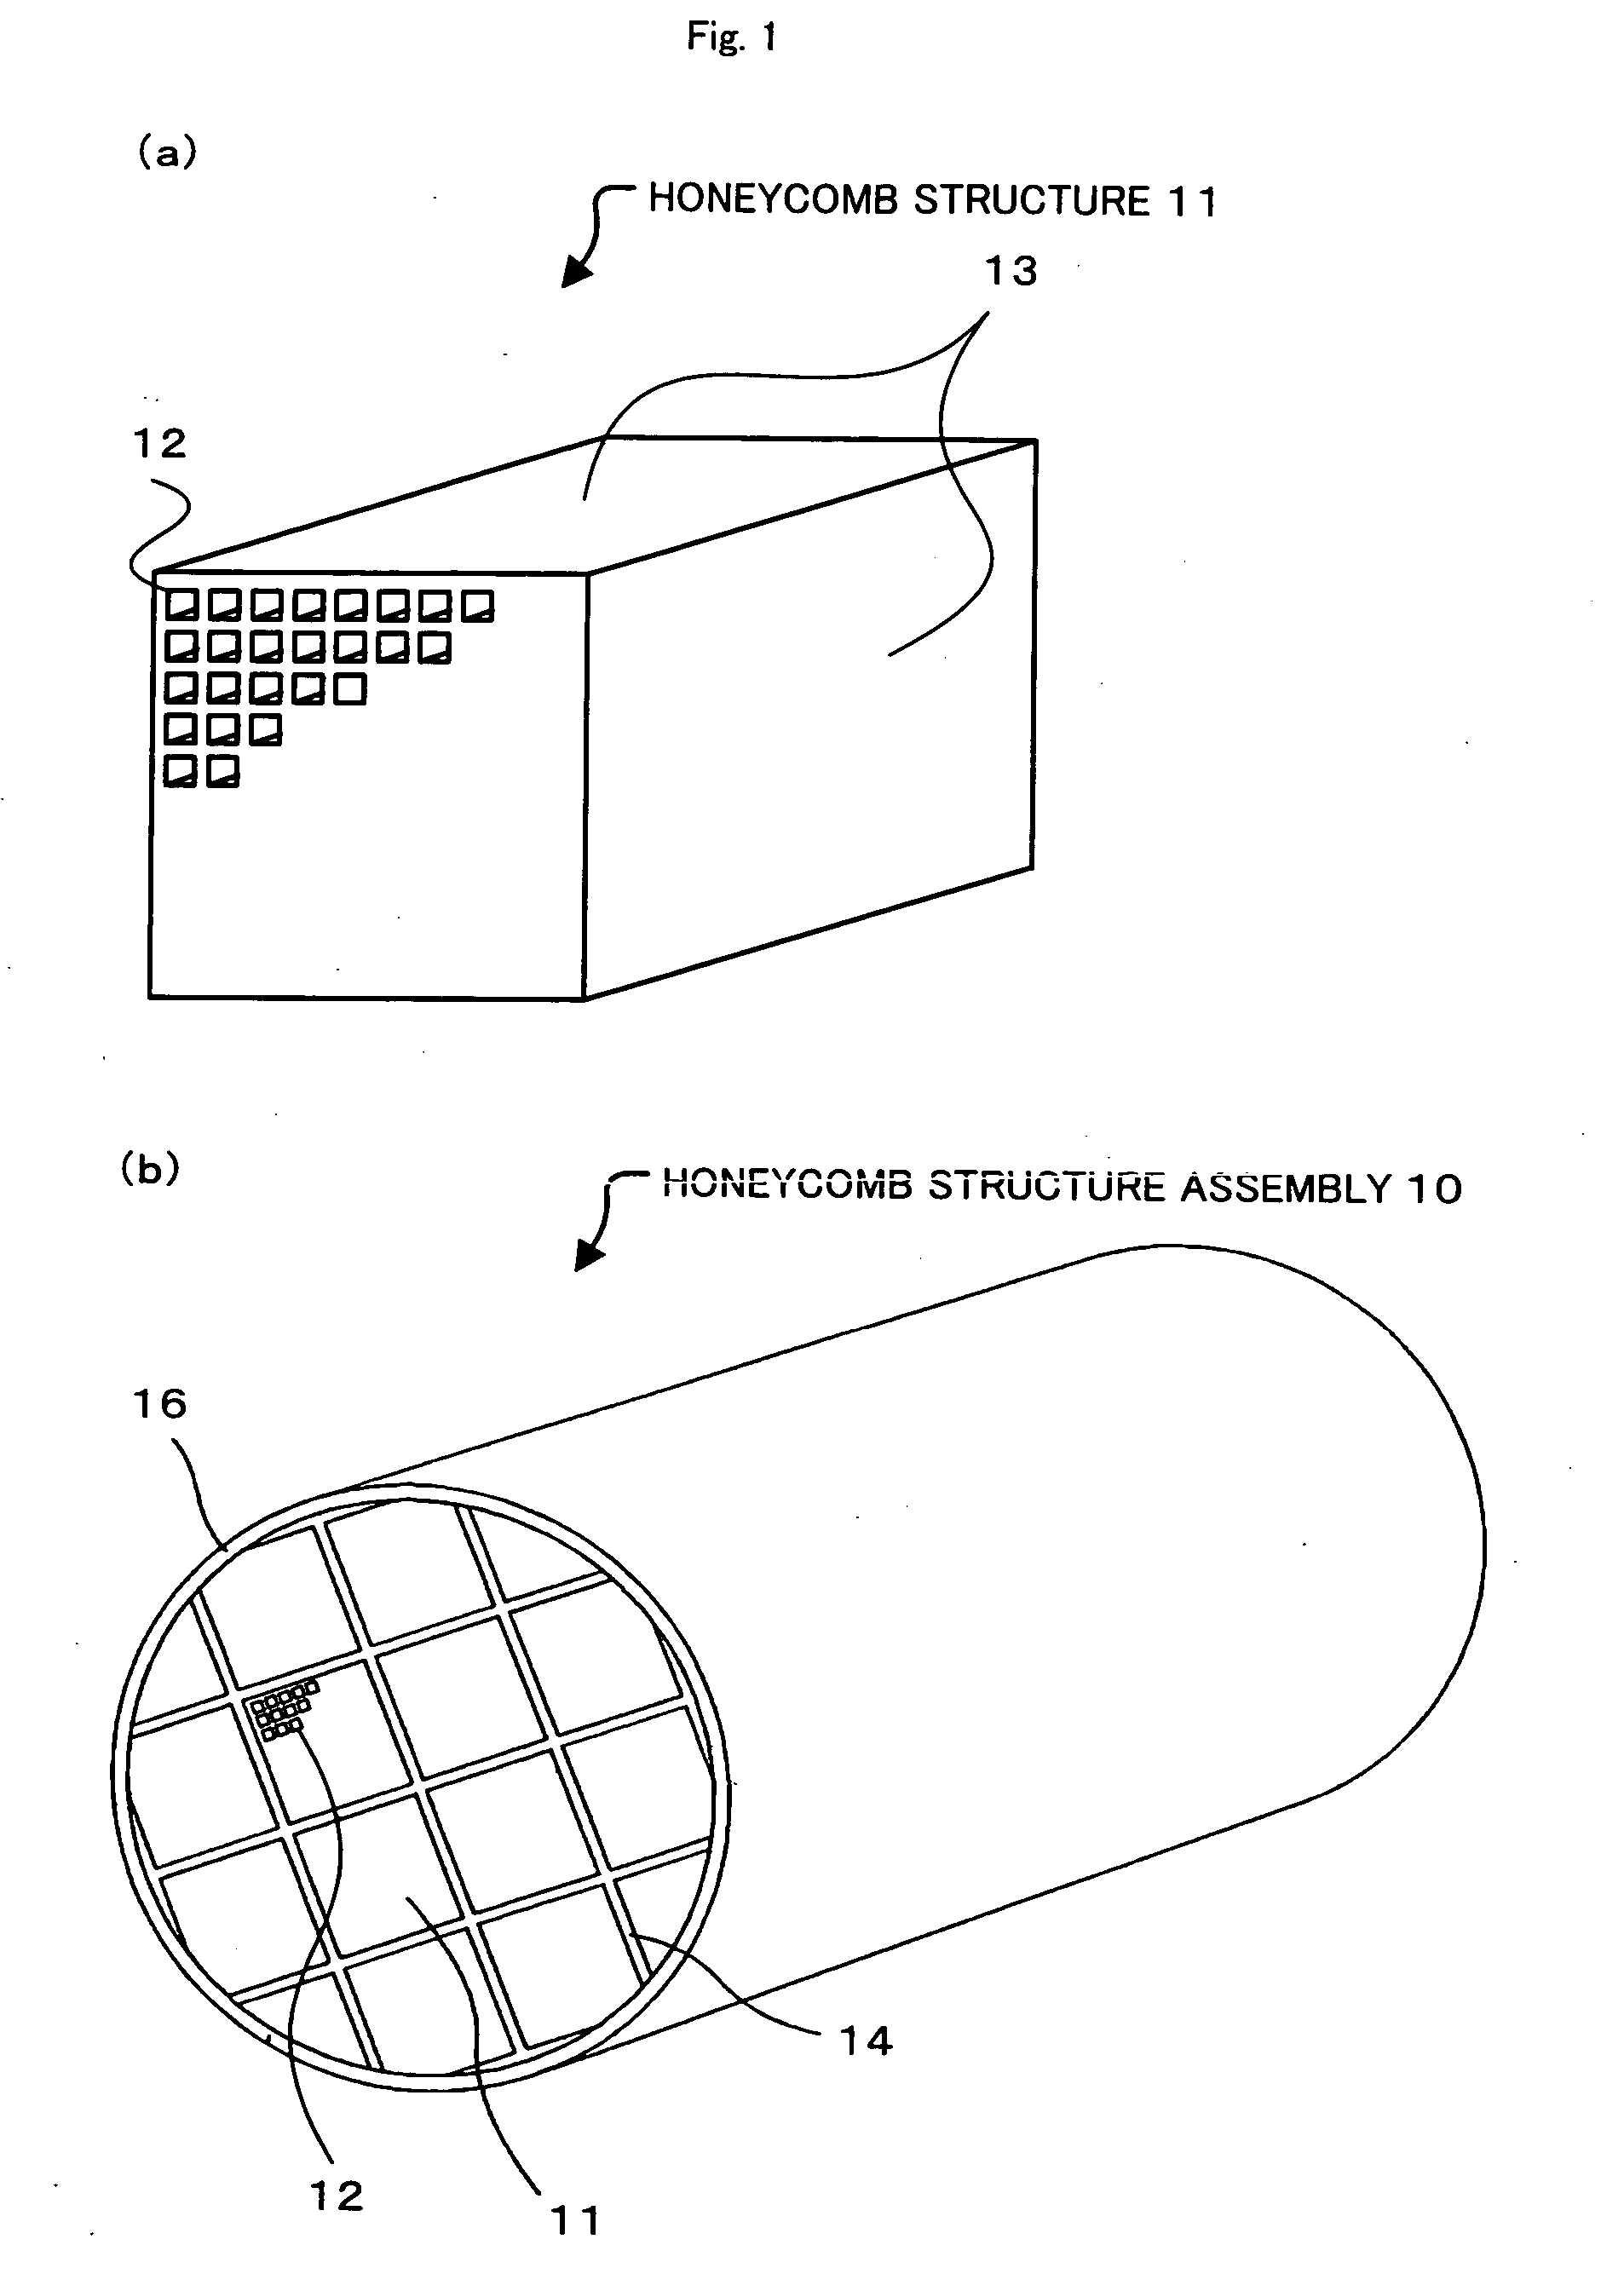 Honeycomb structure, honeycomb structure assembly, and honeycomb catalyst